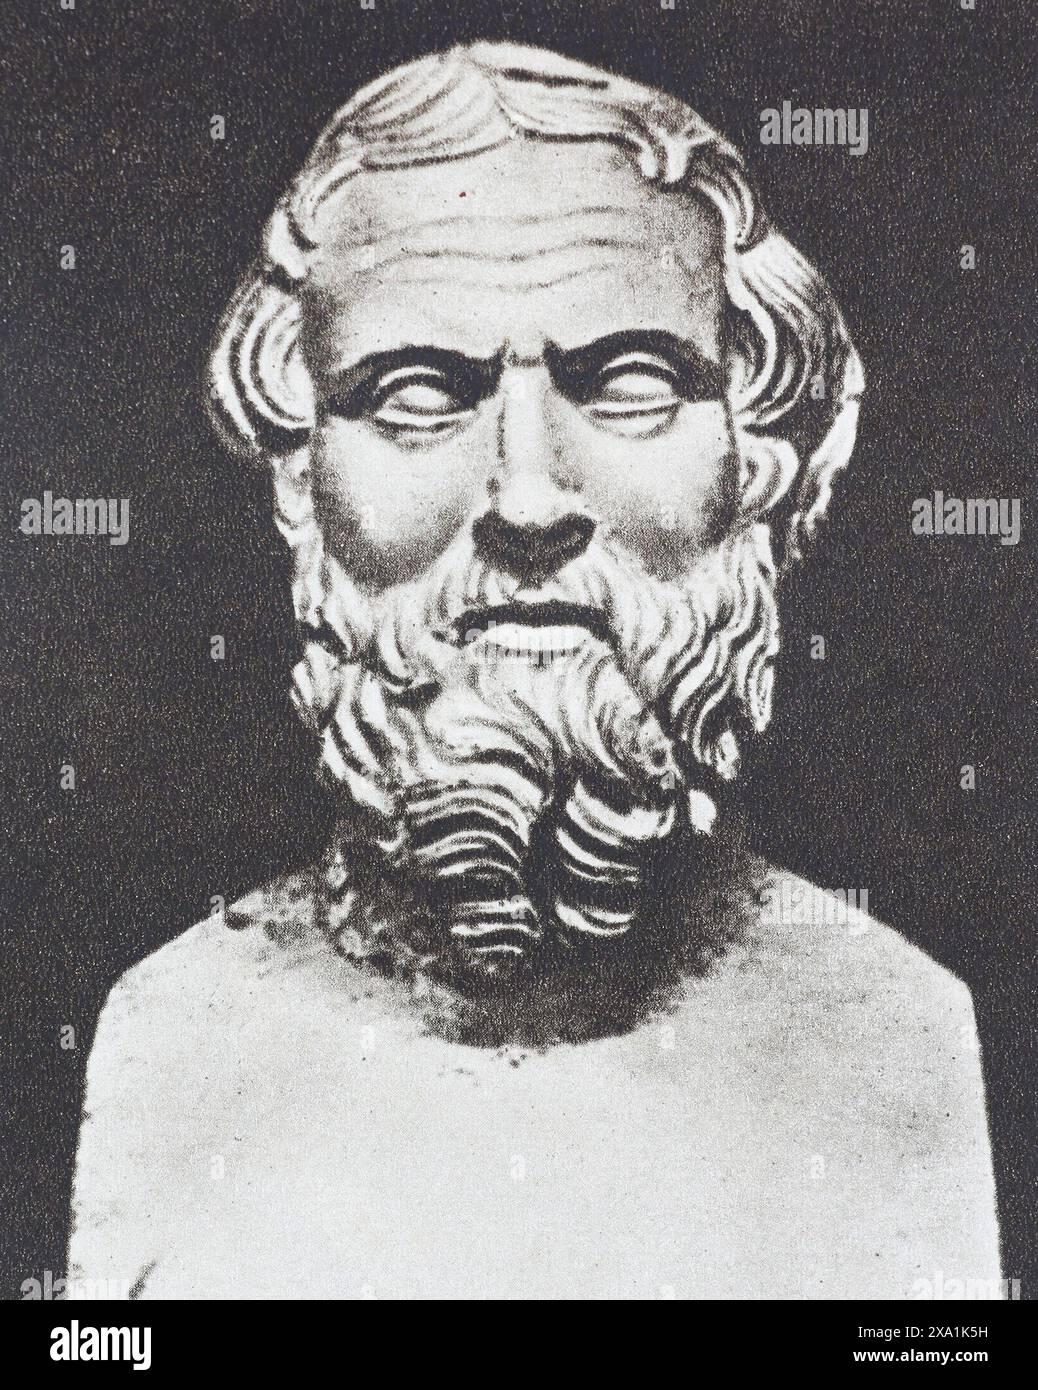 Marble bust of Herodotus - ancient Greek historian. Photography from the mid-20th century. Stock Photo